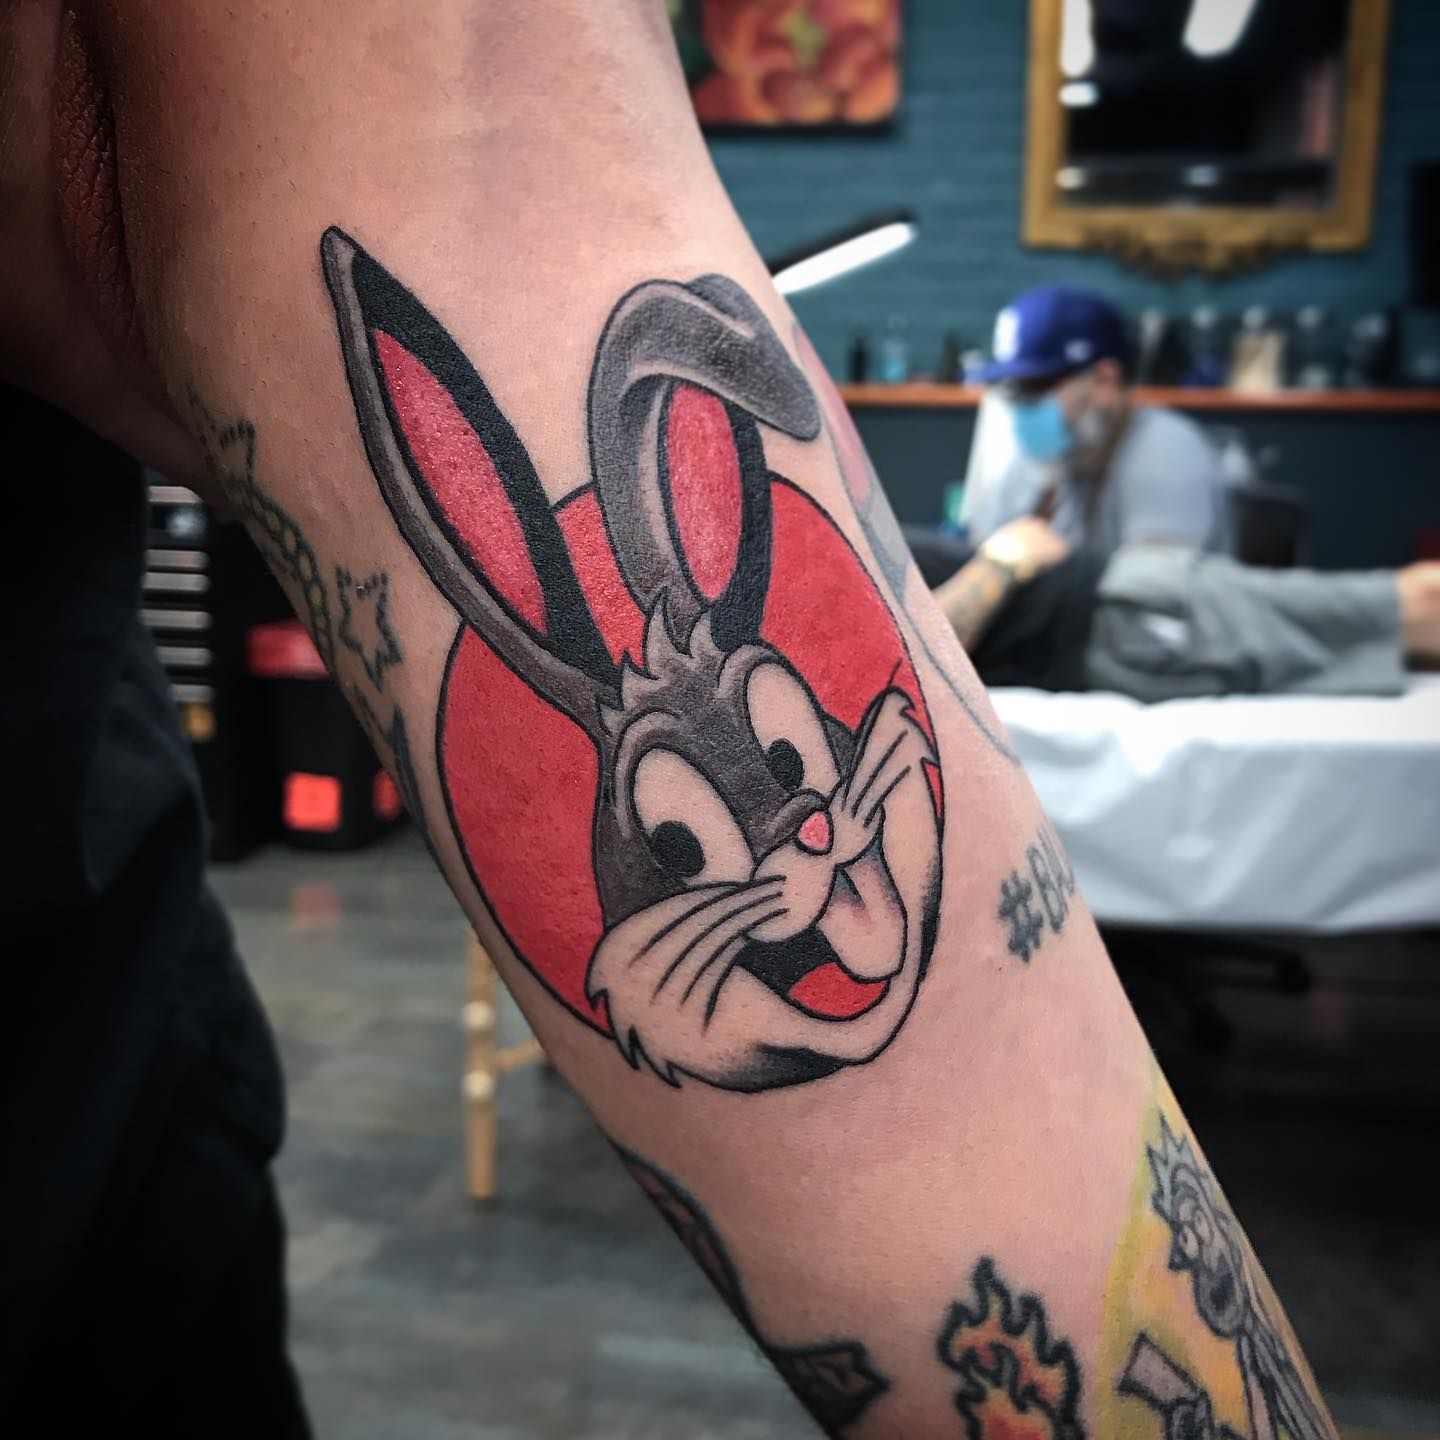 Bad Bunny Tattoo Top Designs With Significant Meaning  Tattoo Twist